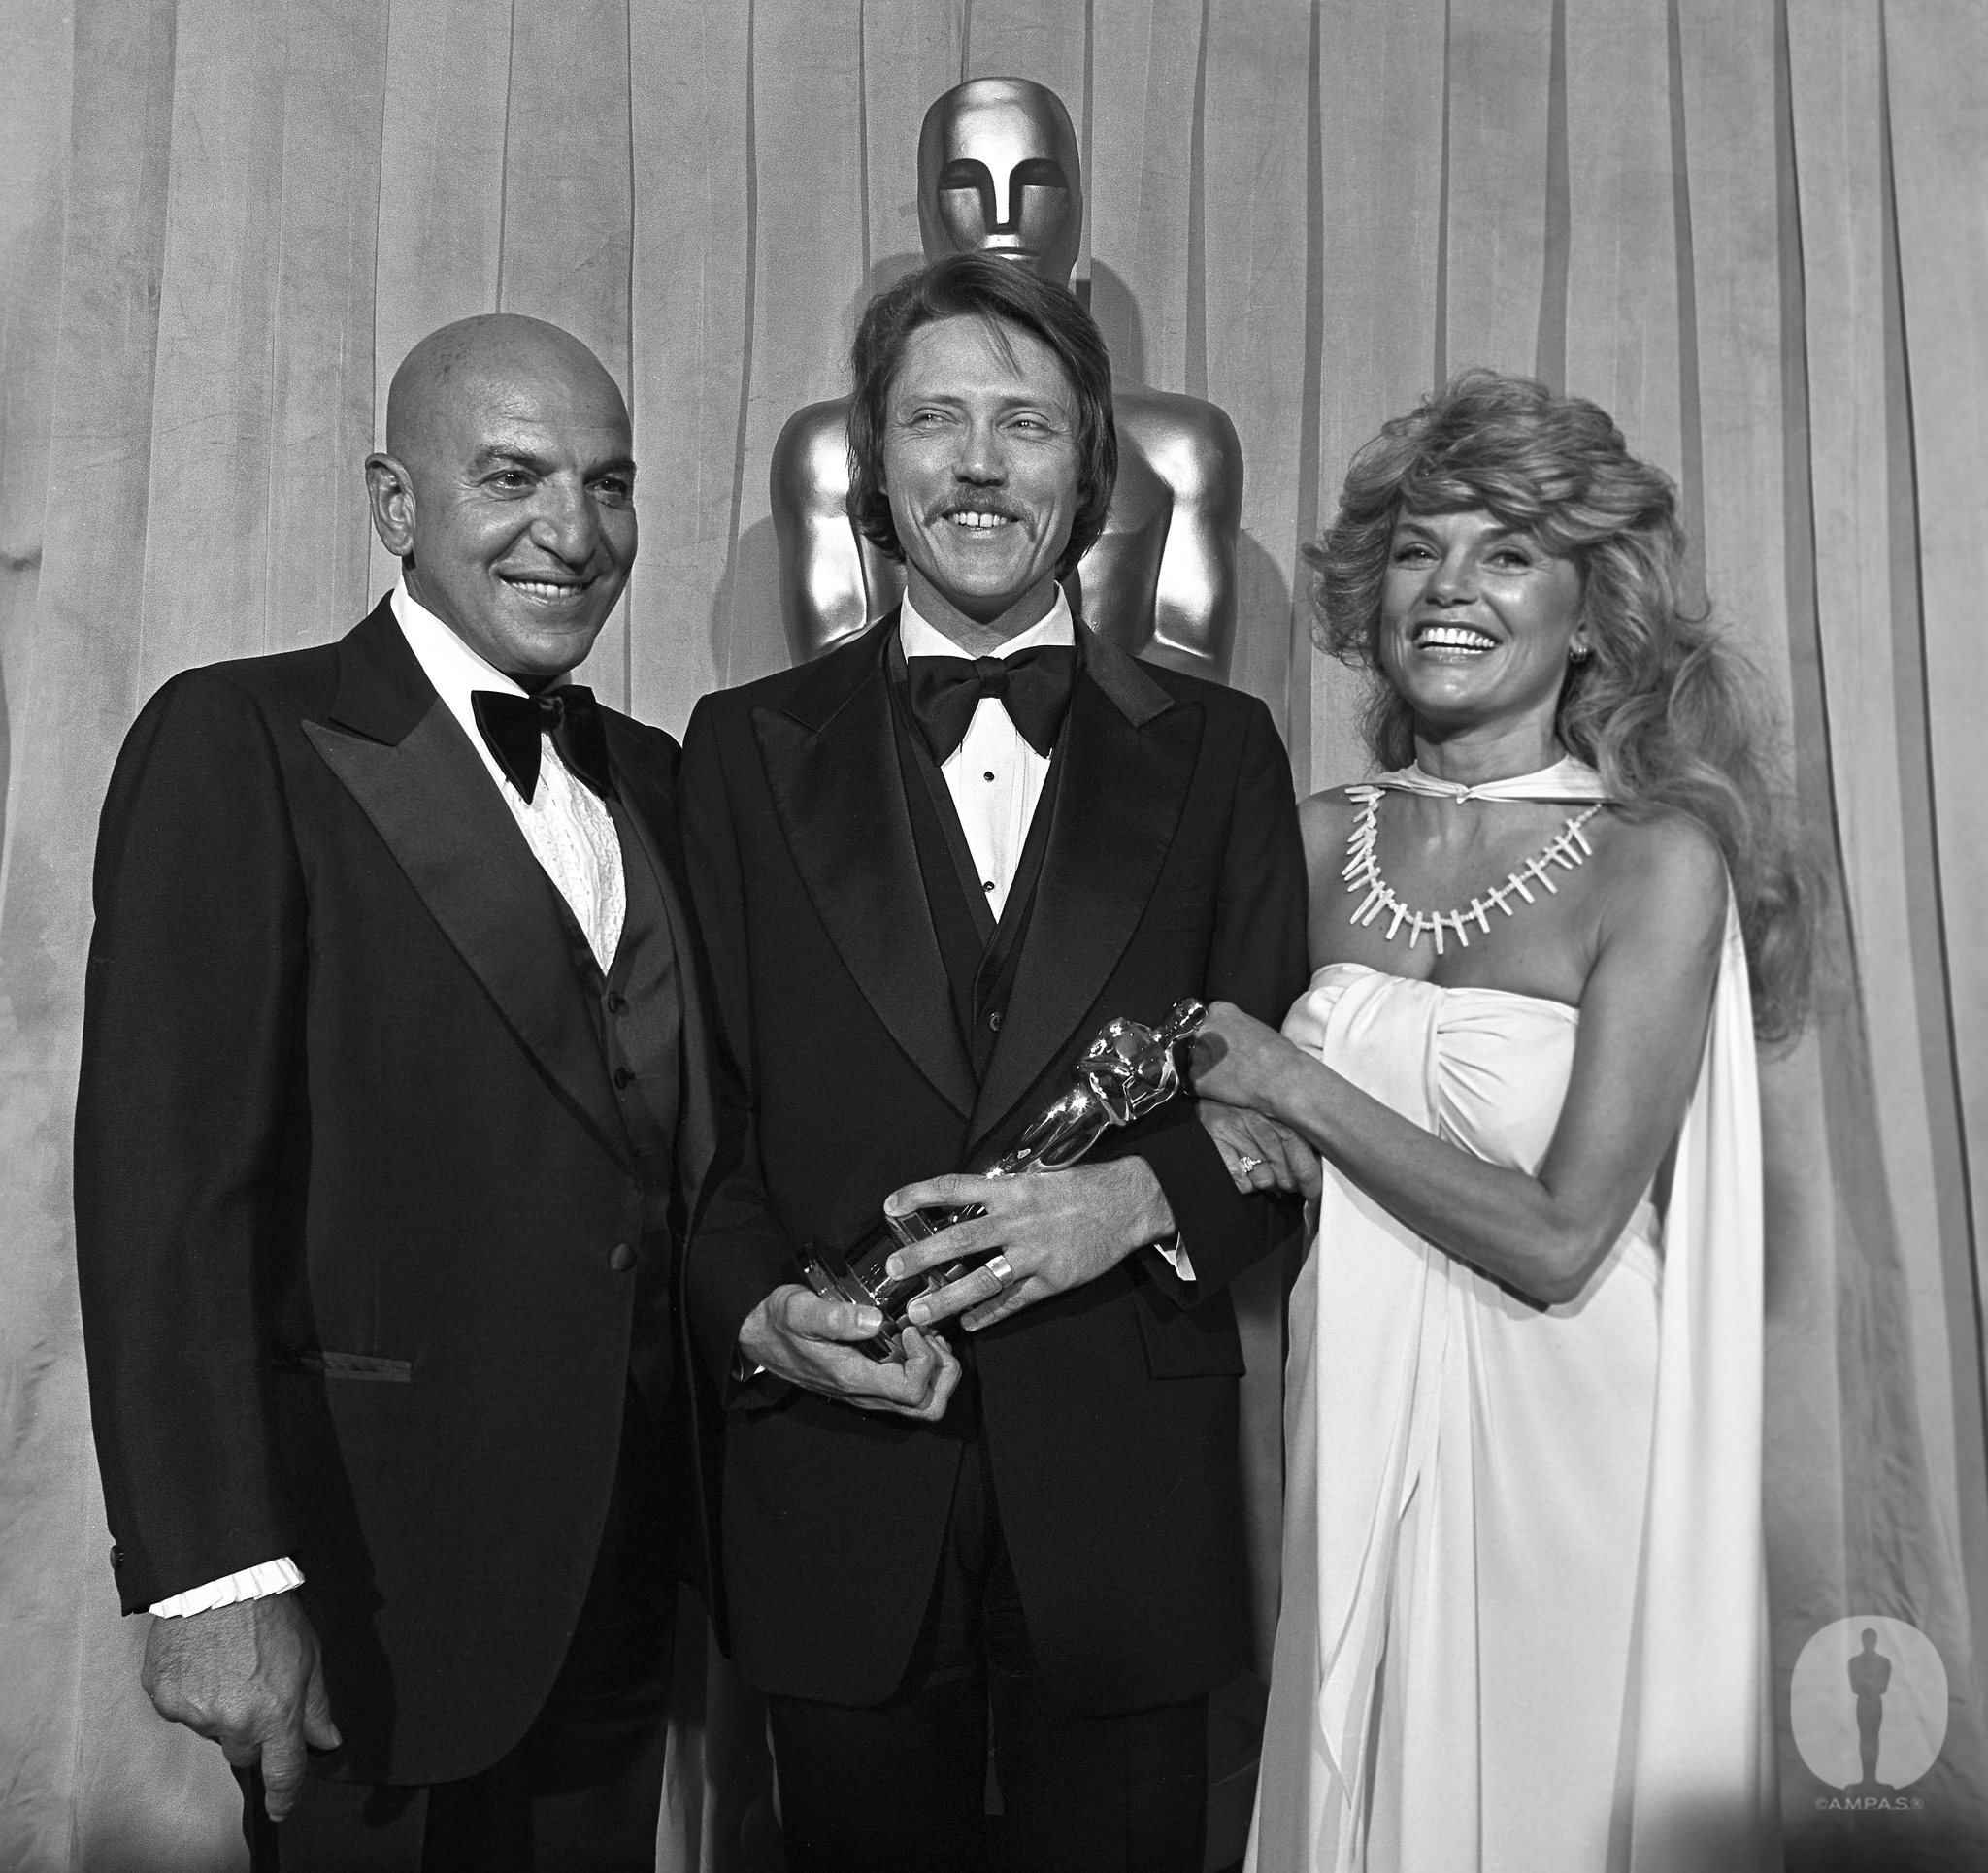 Christopher Walken, Dyan Cannon and Telly Savalas at event of The 51st Annual Academy Awards (1979)